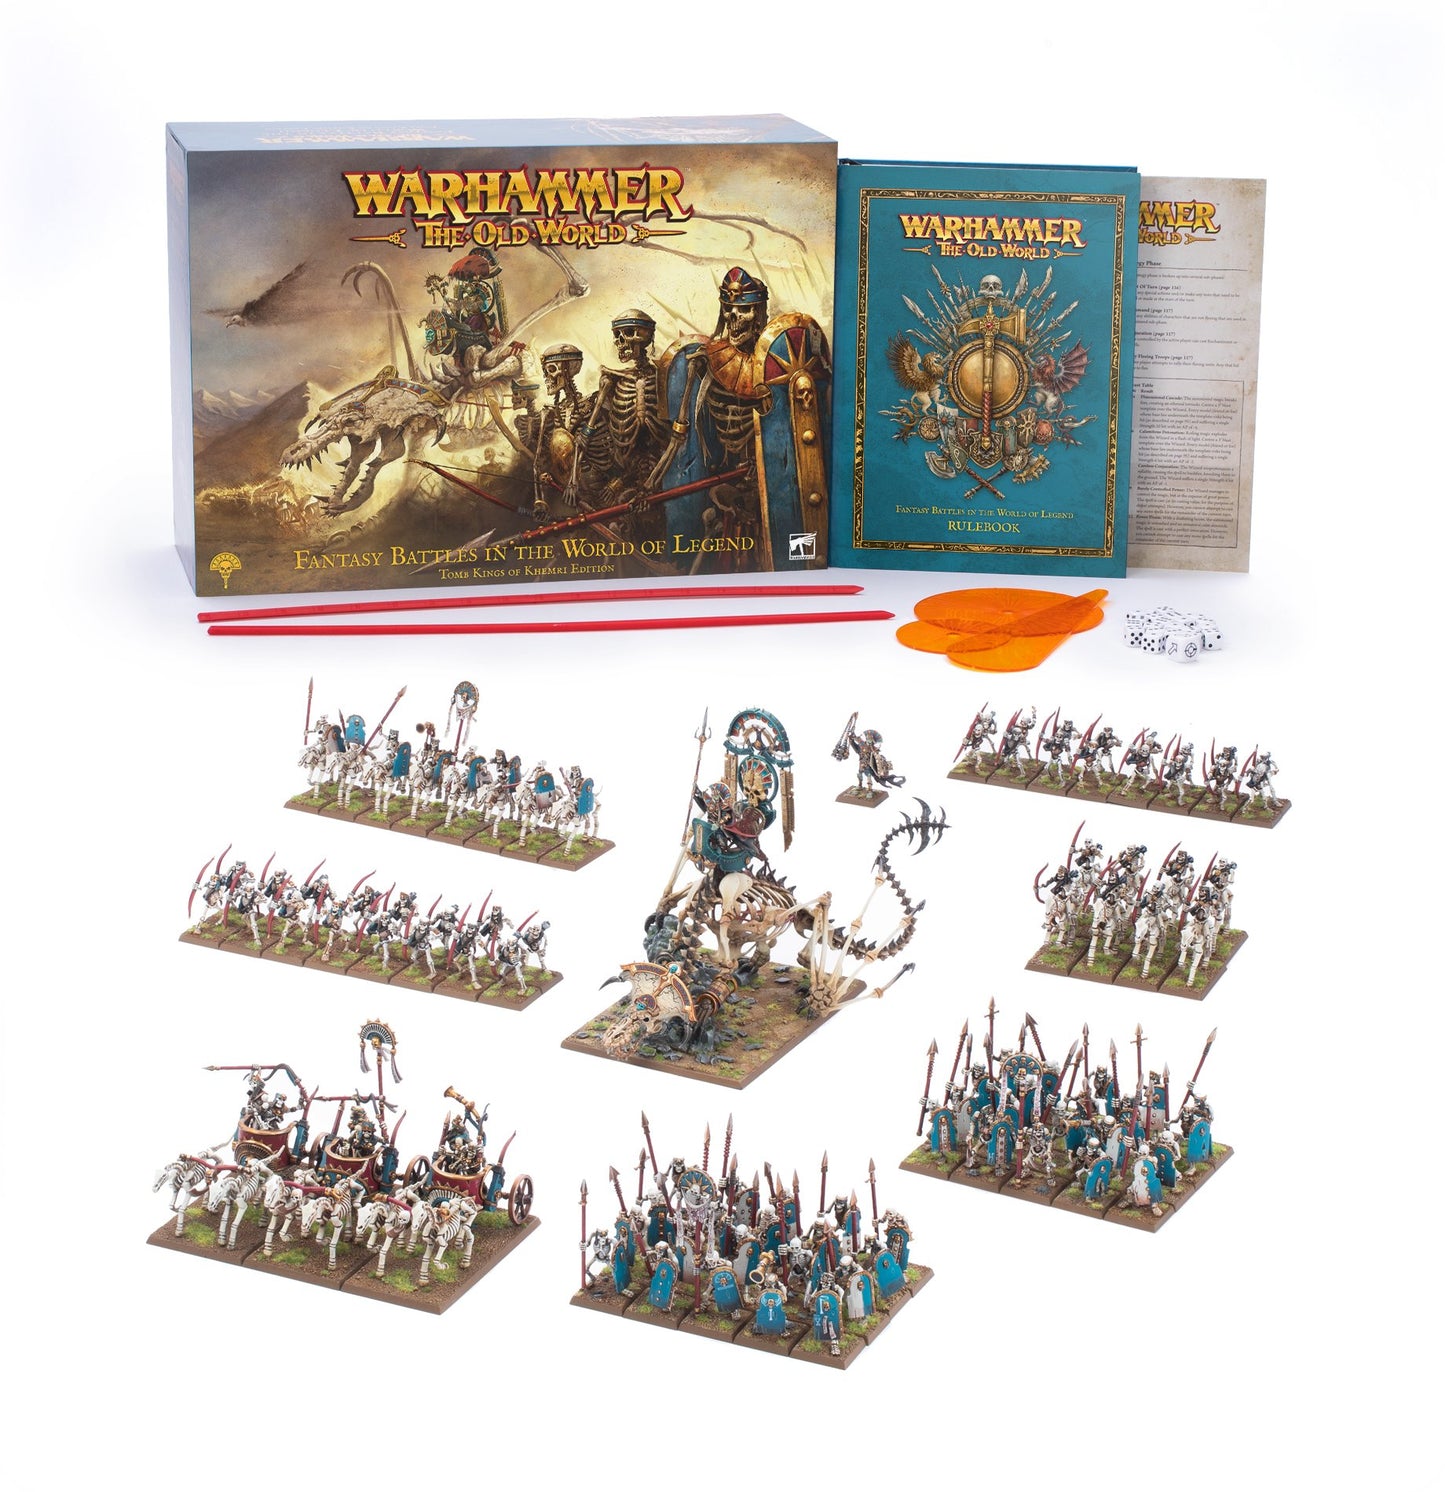 WARHAMMER THE OLD WORLD - Tomb Kings of Khemri Edition